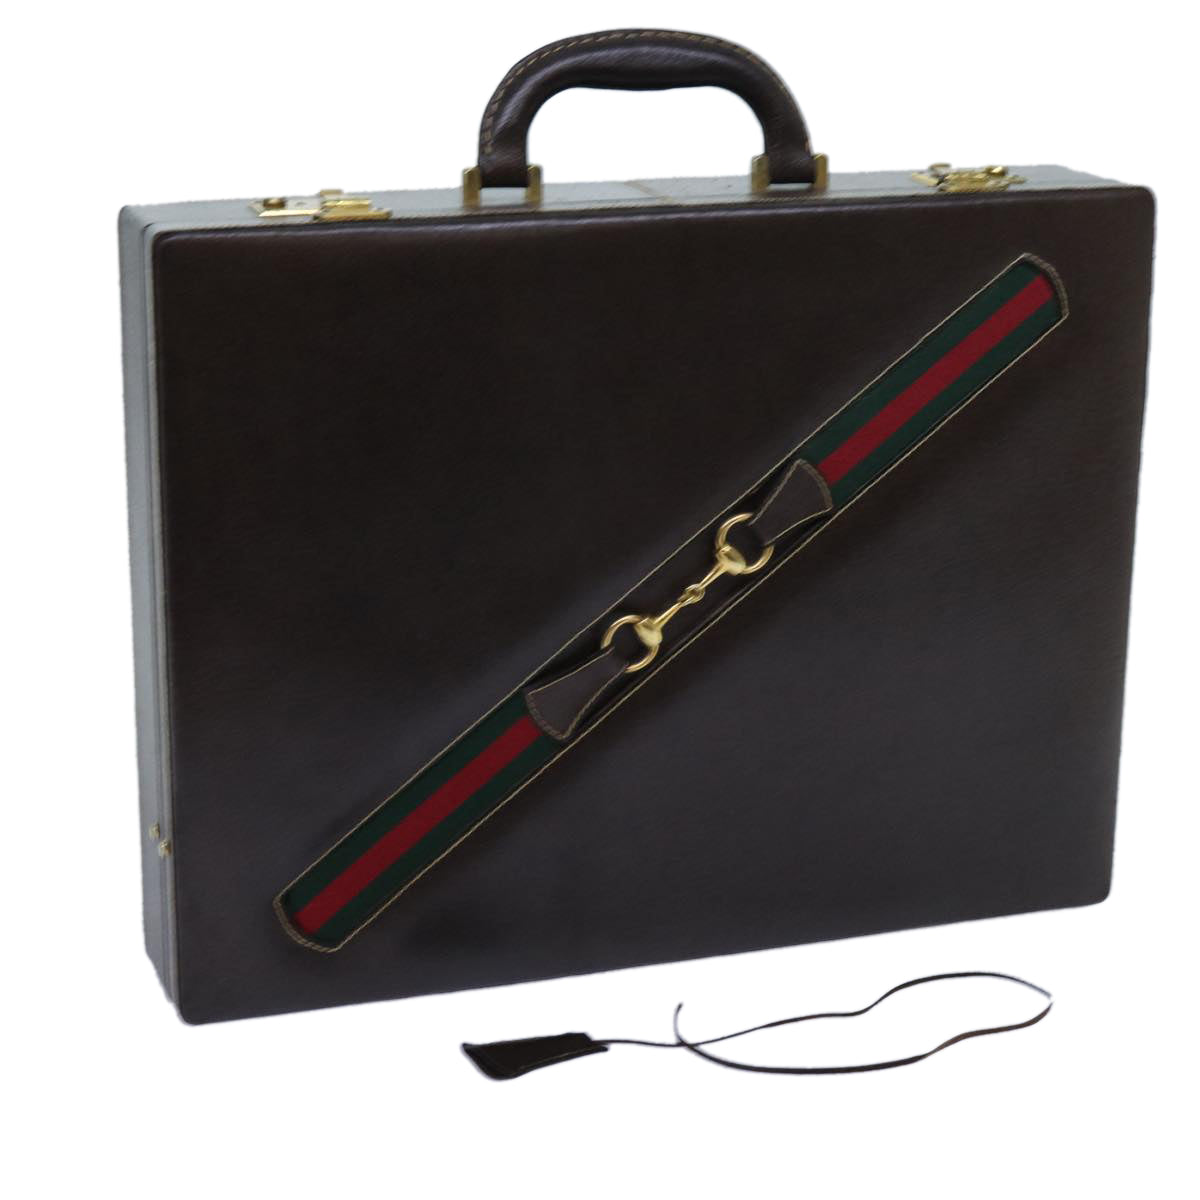 GUCCI Horsebit Old Gucci Briefcase Leather Red Green Brown Auth ki4323